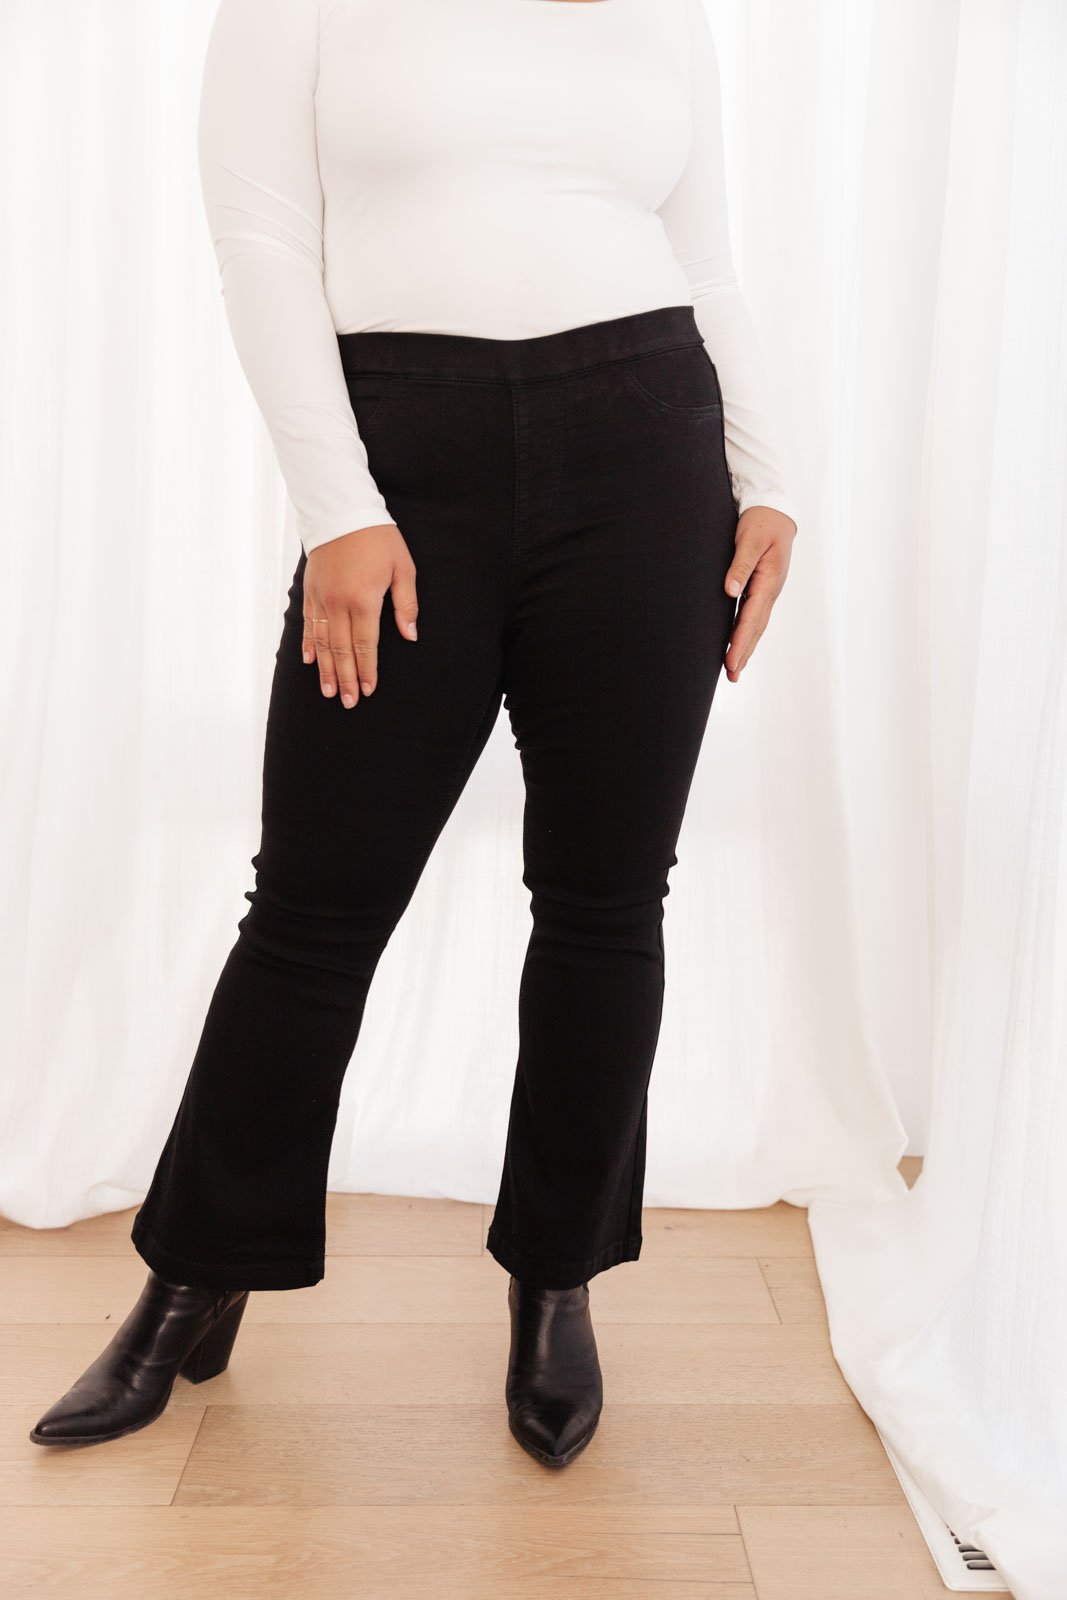 Next Level Black Flare Jeans (Online Exclusive) – Uptown Boutique Ramona